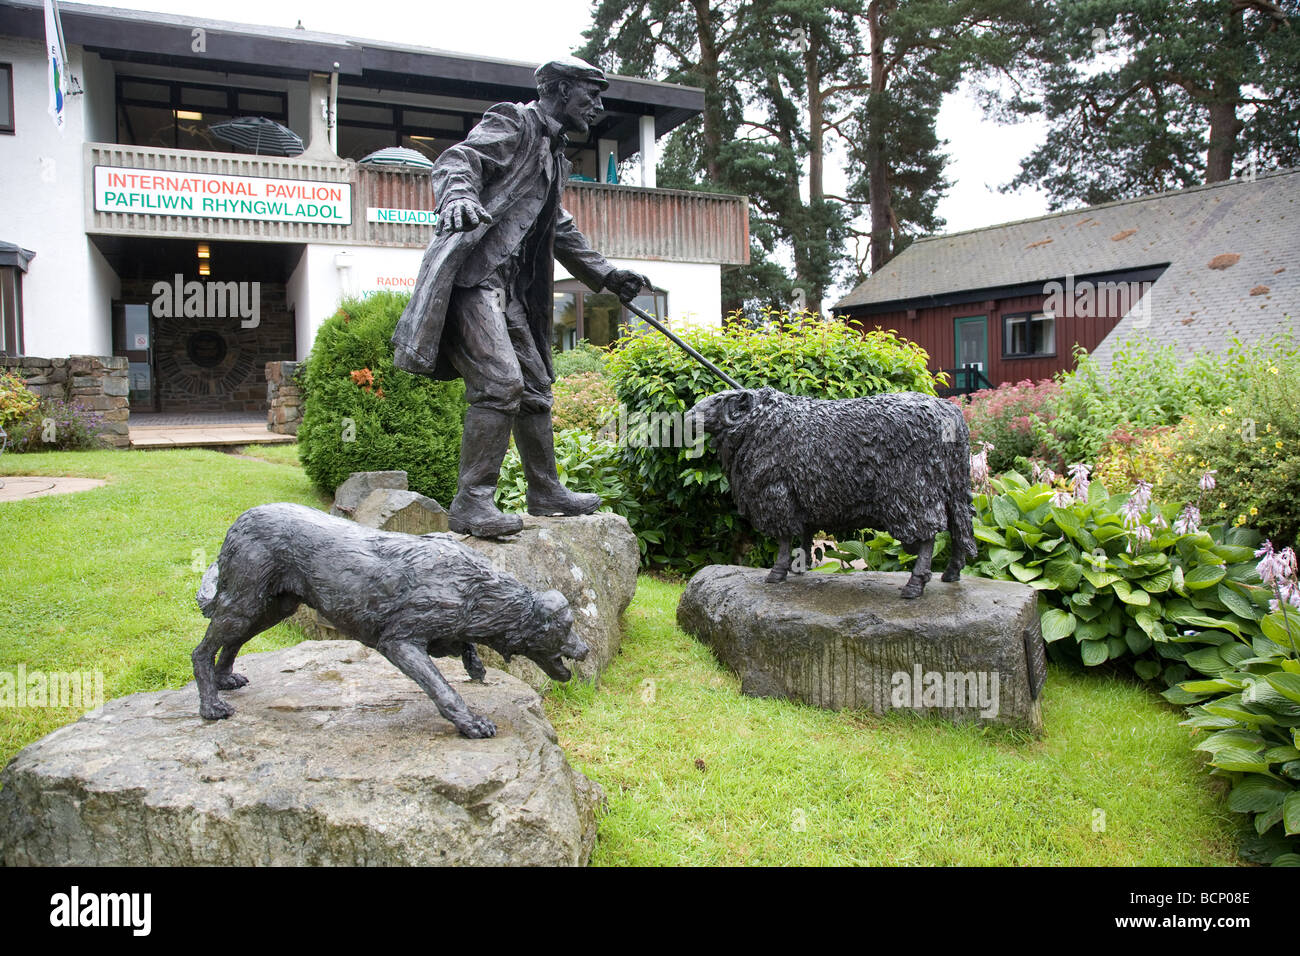 Sculpture of A Welsh Shepherd, his sheepdog and a sheep at the International Visitor's Pavilion of the Royal Welsh showground. Stock Photo